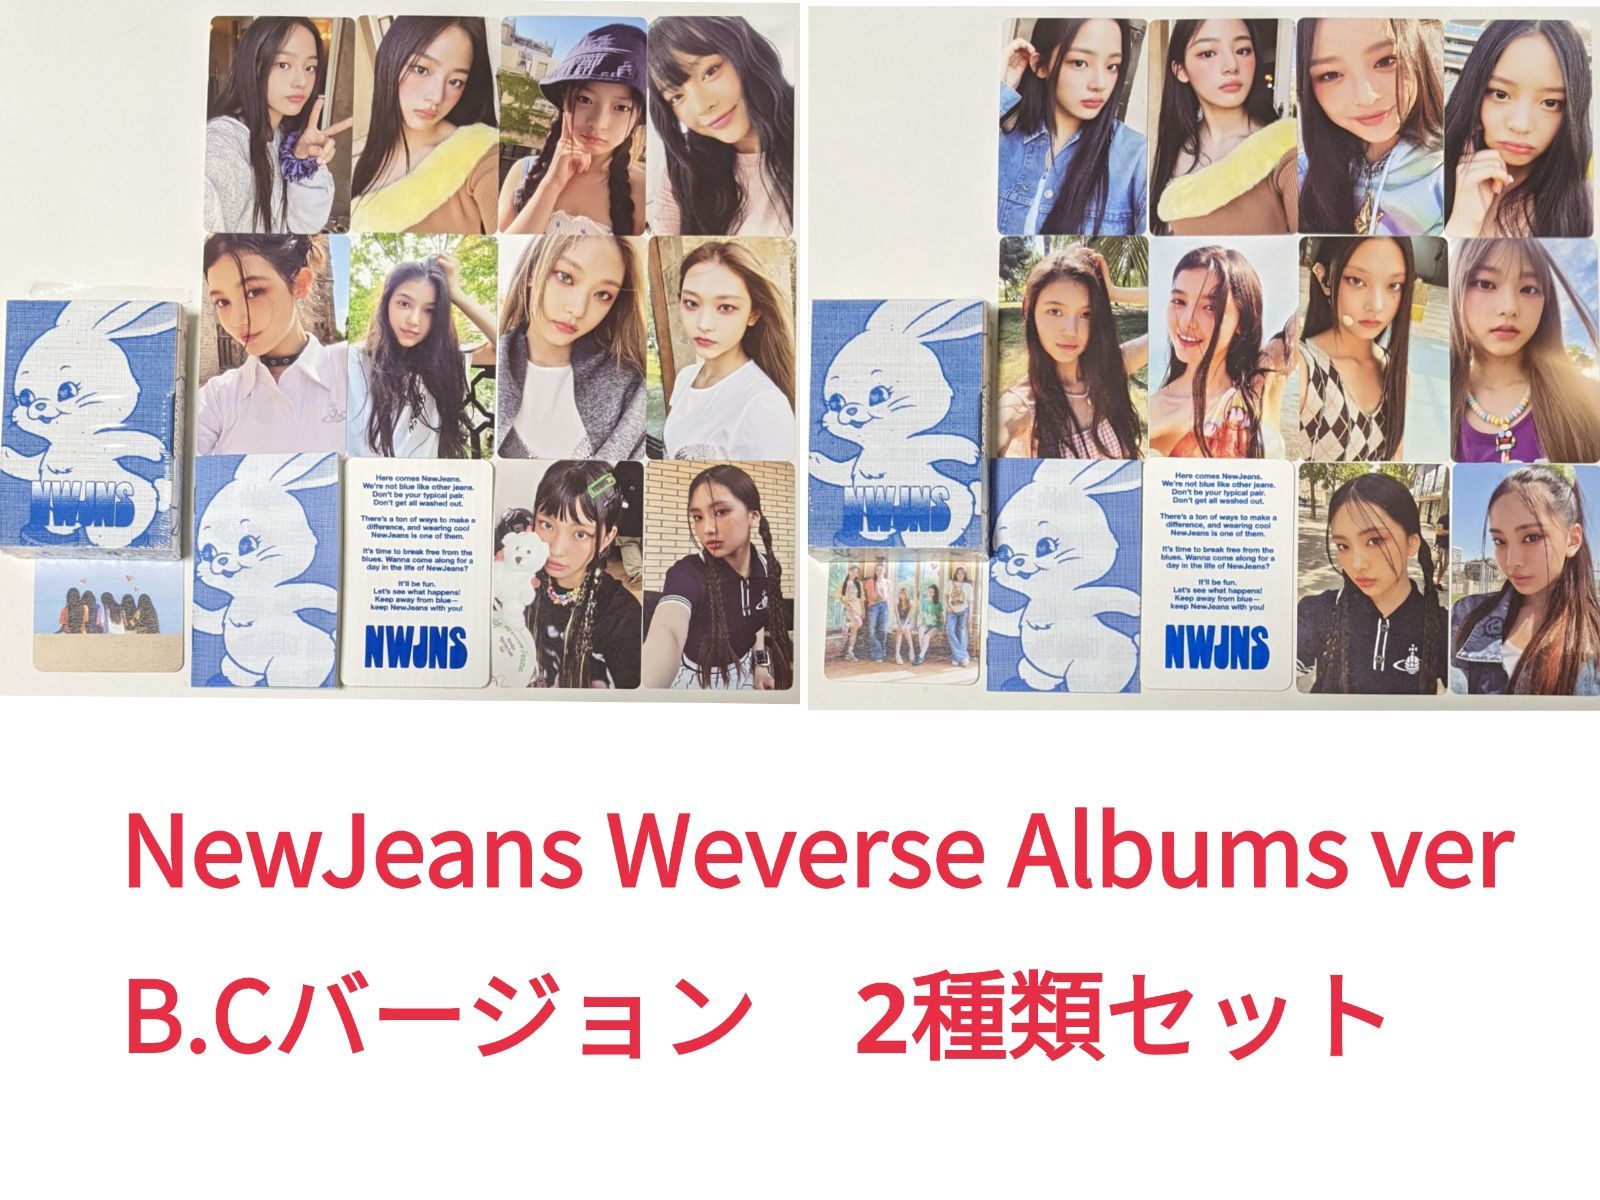 newjeans New Jeans ハニ ラキドロ weverse-